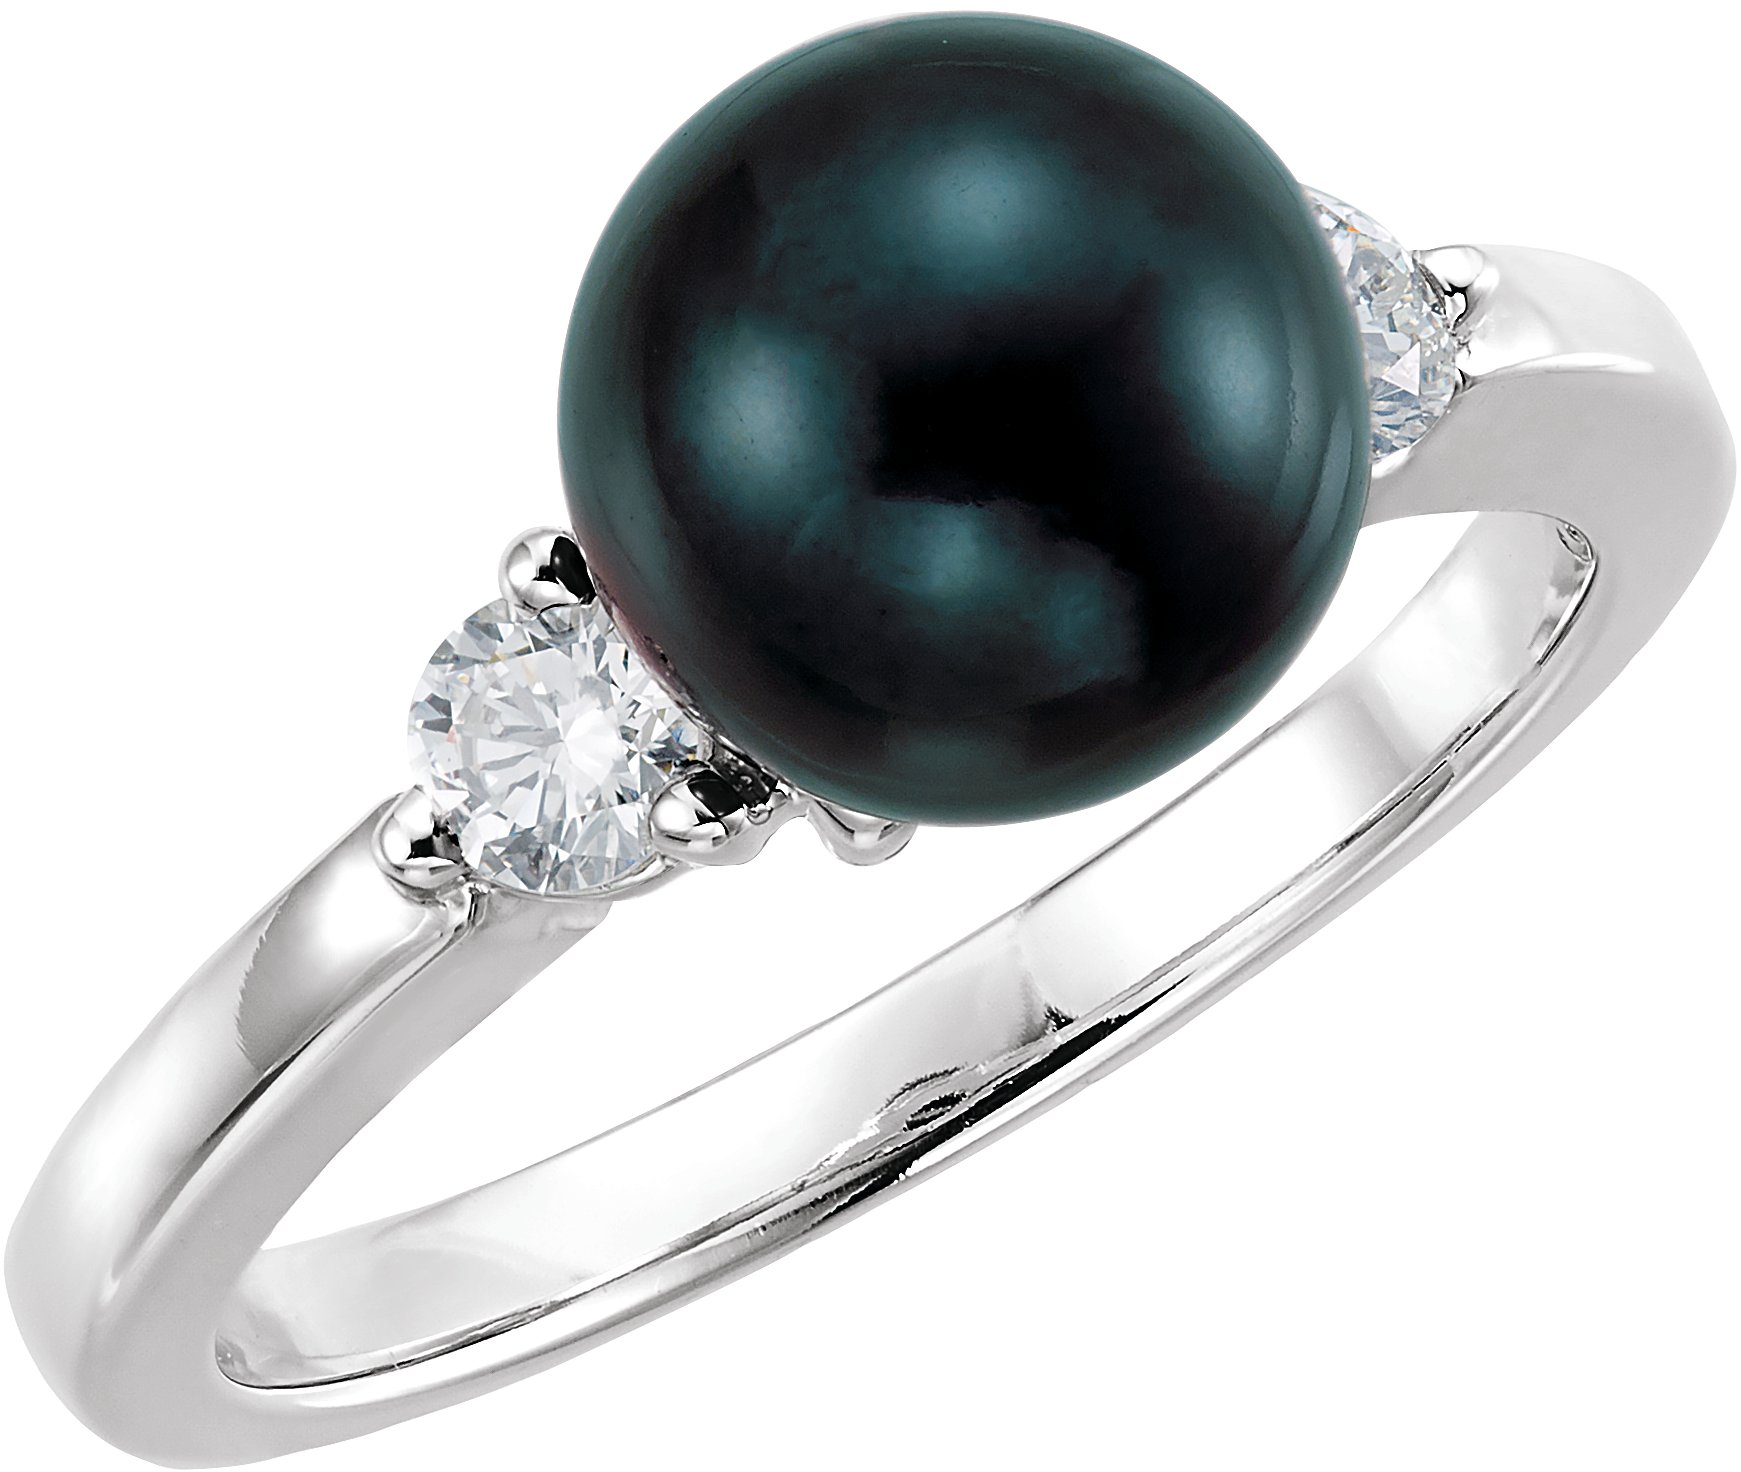 Black Cultured Pearl 8mm and Diamond Ring .25 CTW Ref 752864